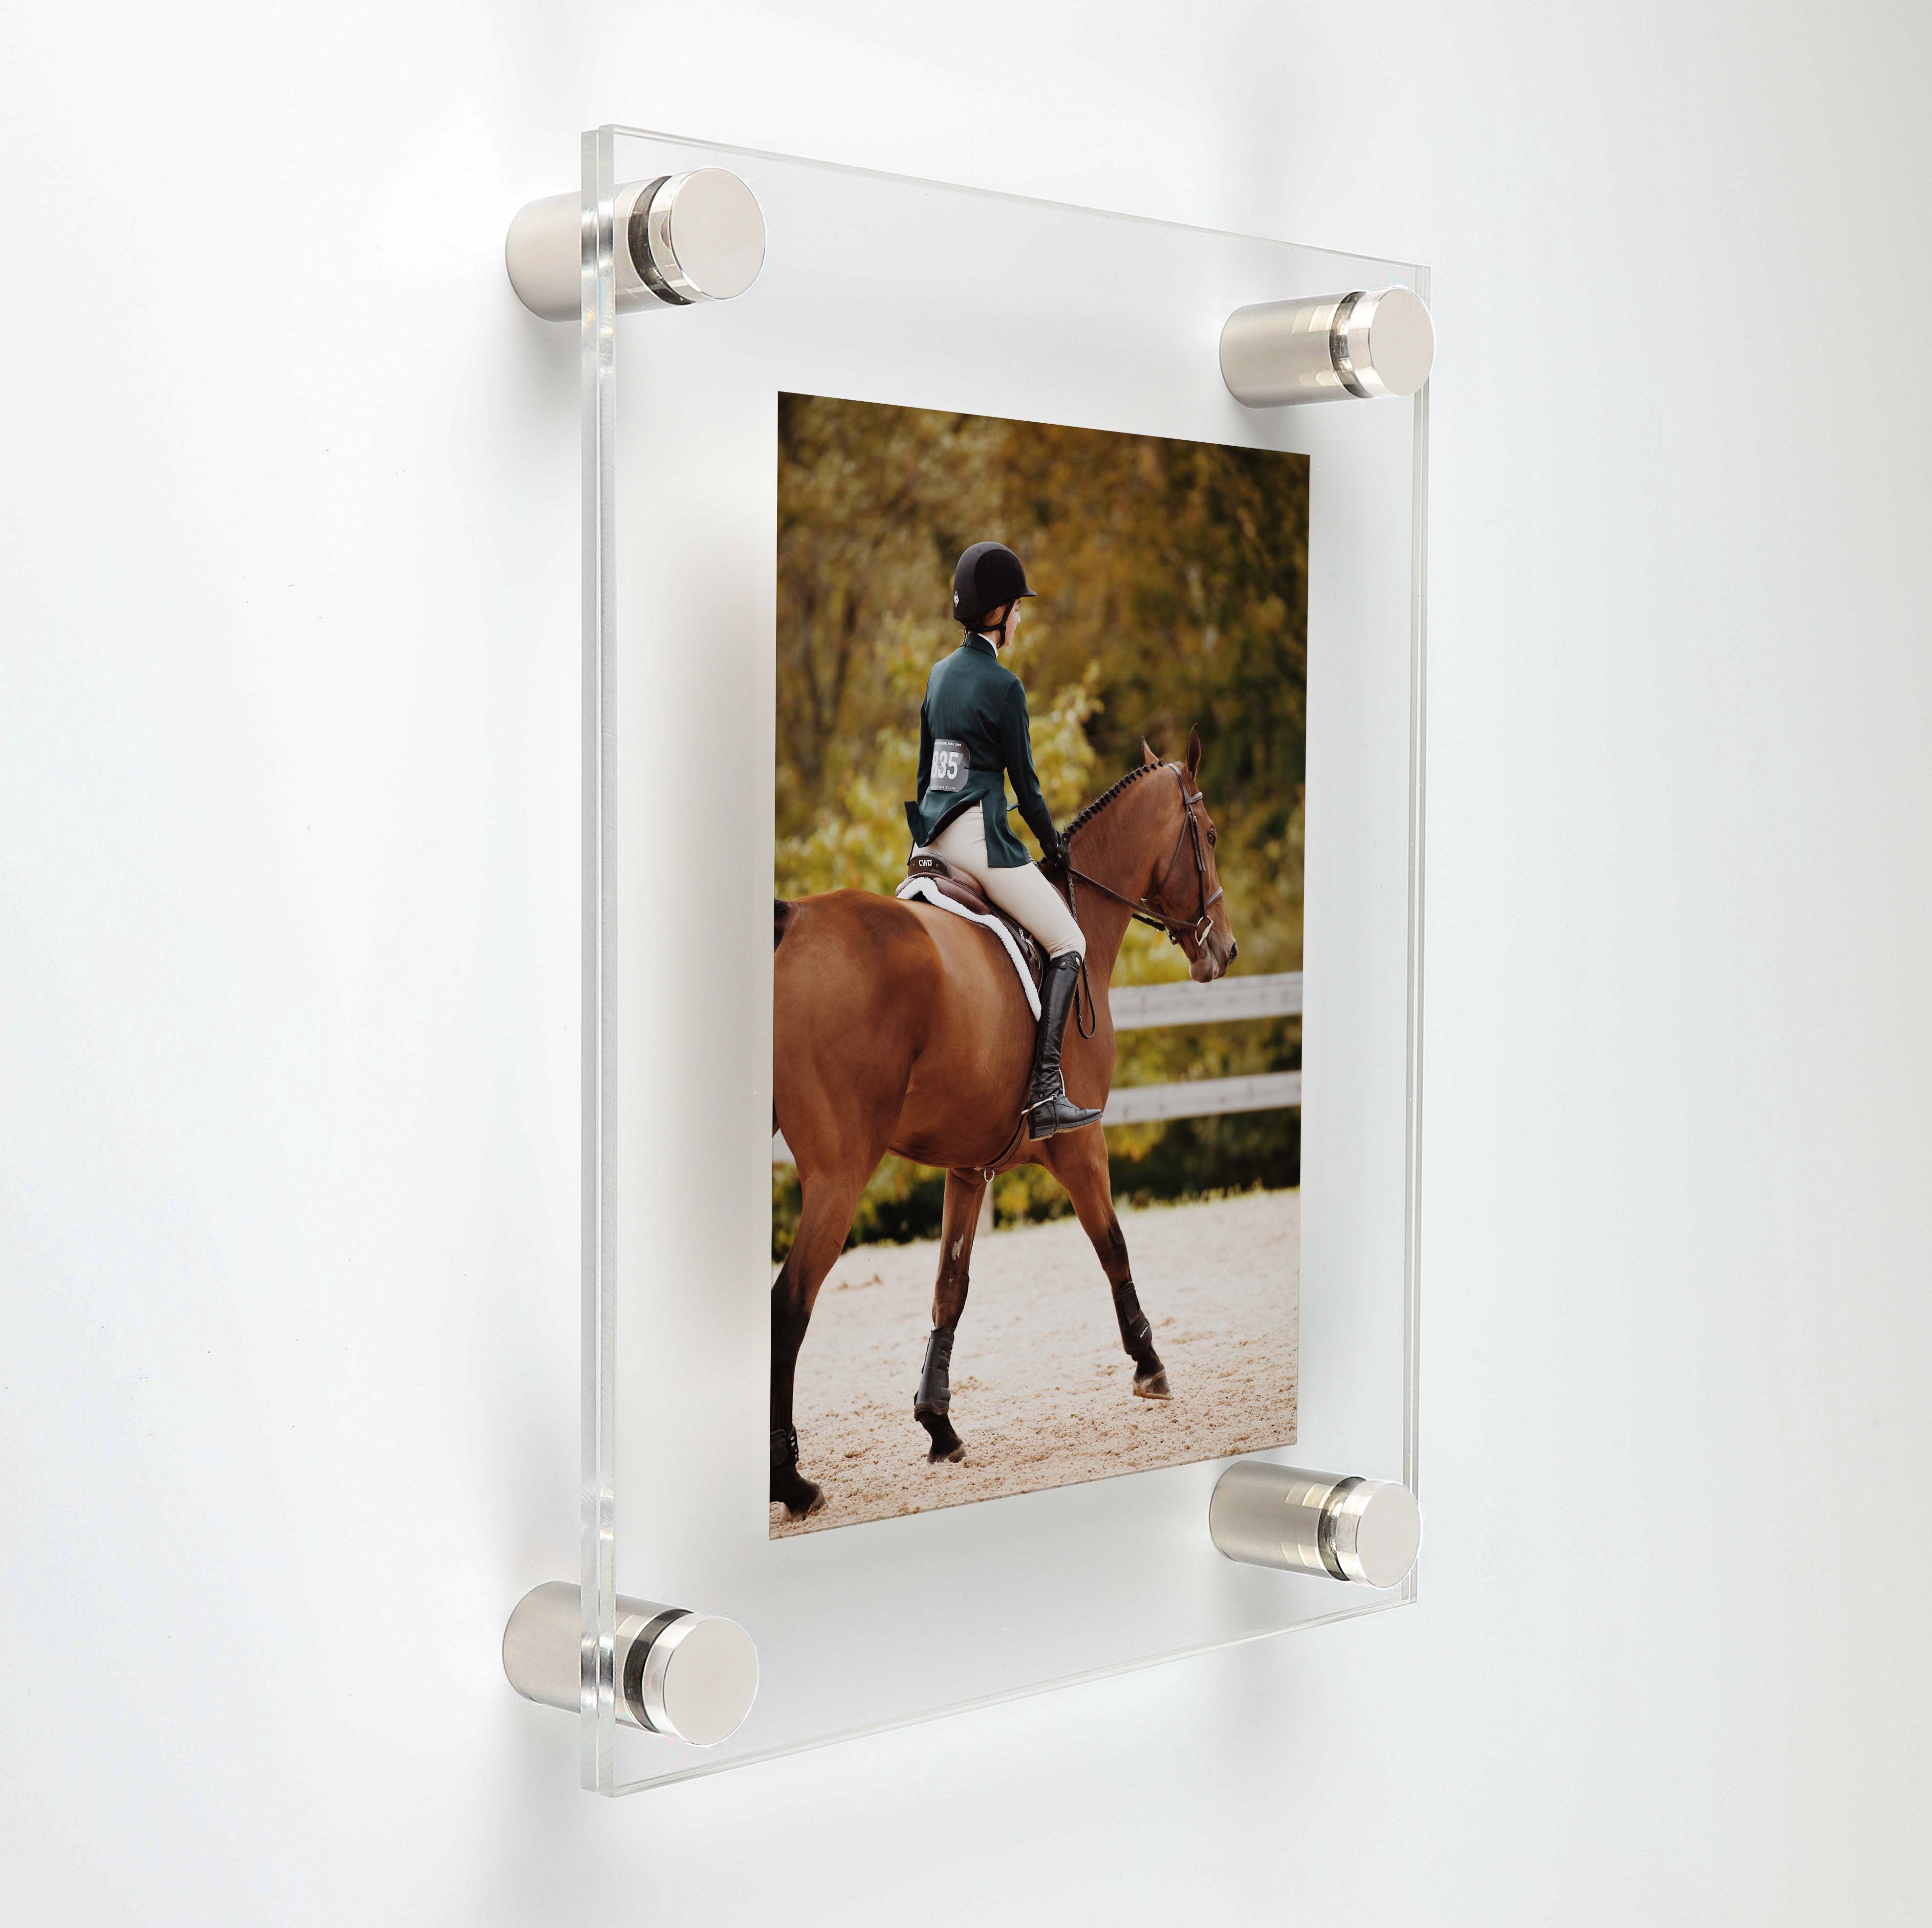 (2) 23-3/4'' x 29-3/4'' Clear Acrylics , Pre-Drilled With Polished Edges (Thick 3/16'' each), Wall Frame with (4) 5/8'' x 1'' Polished Stainless Steel Standoffs includes Screws and Anchors